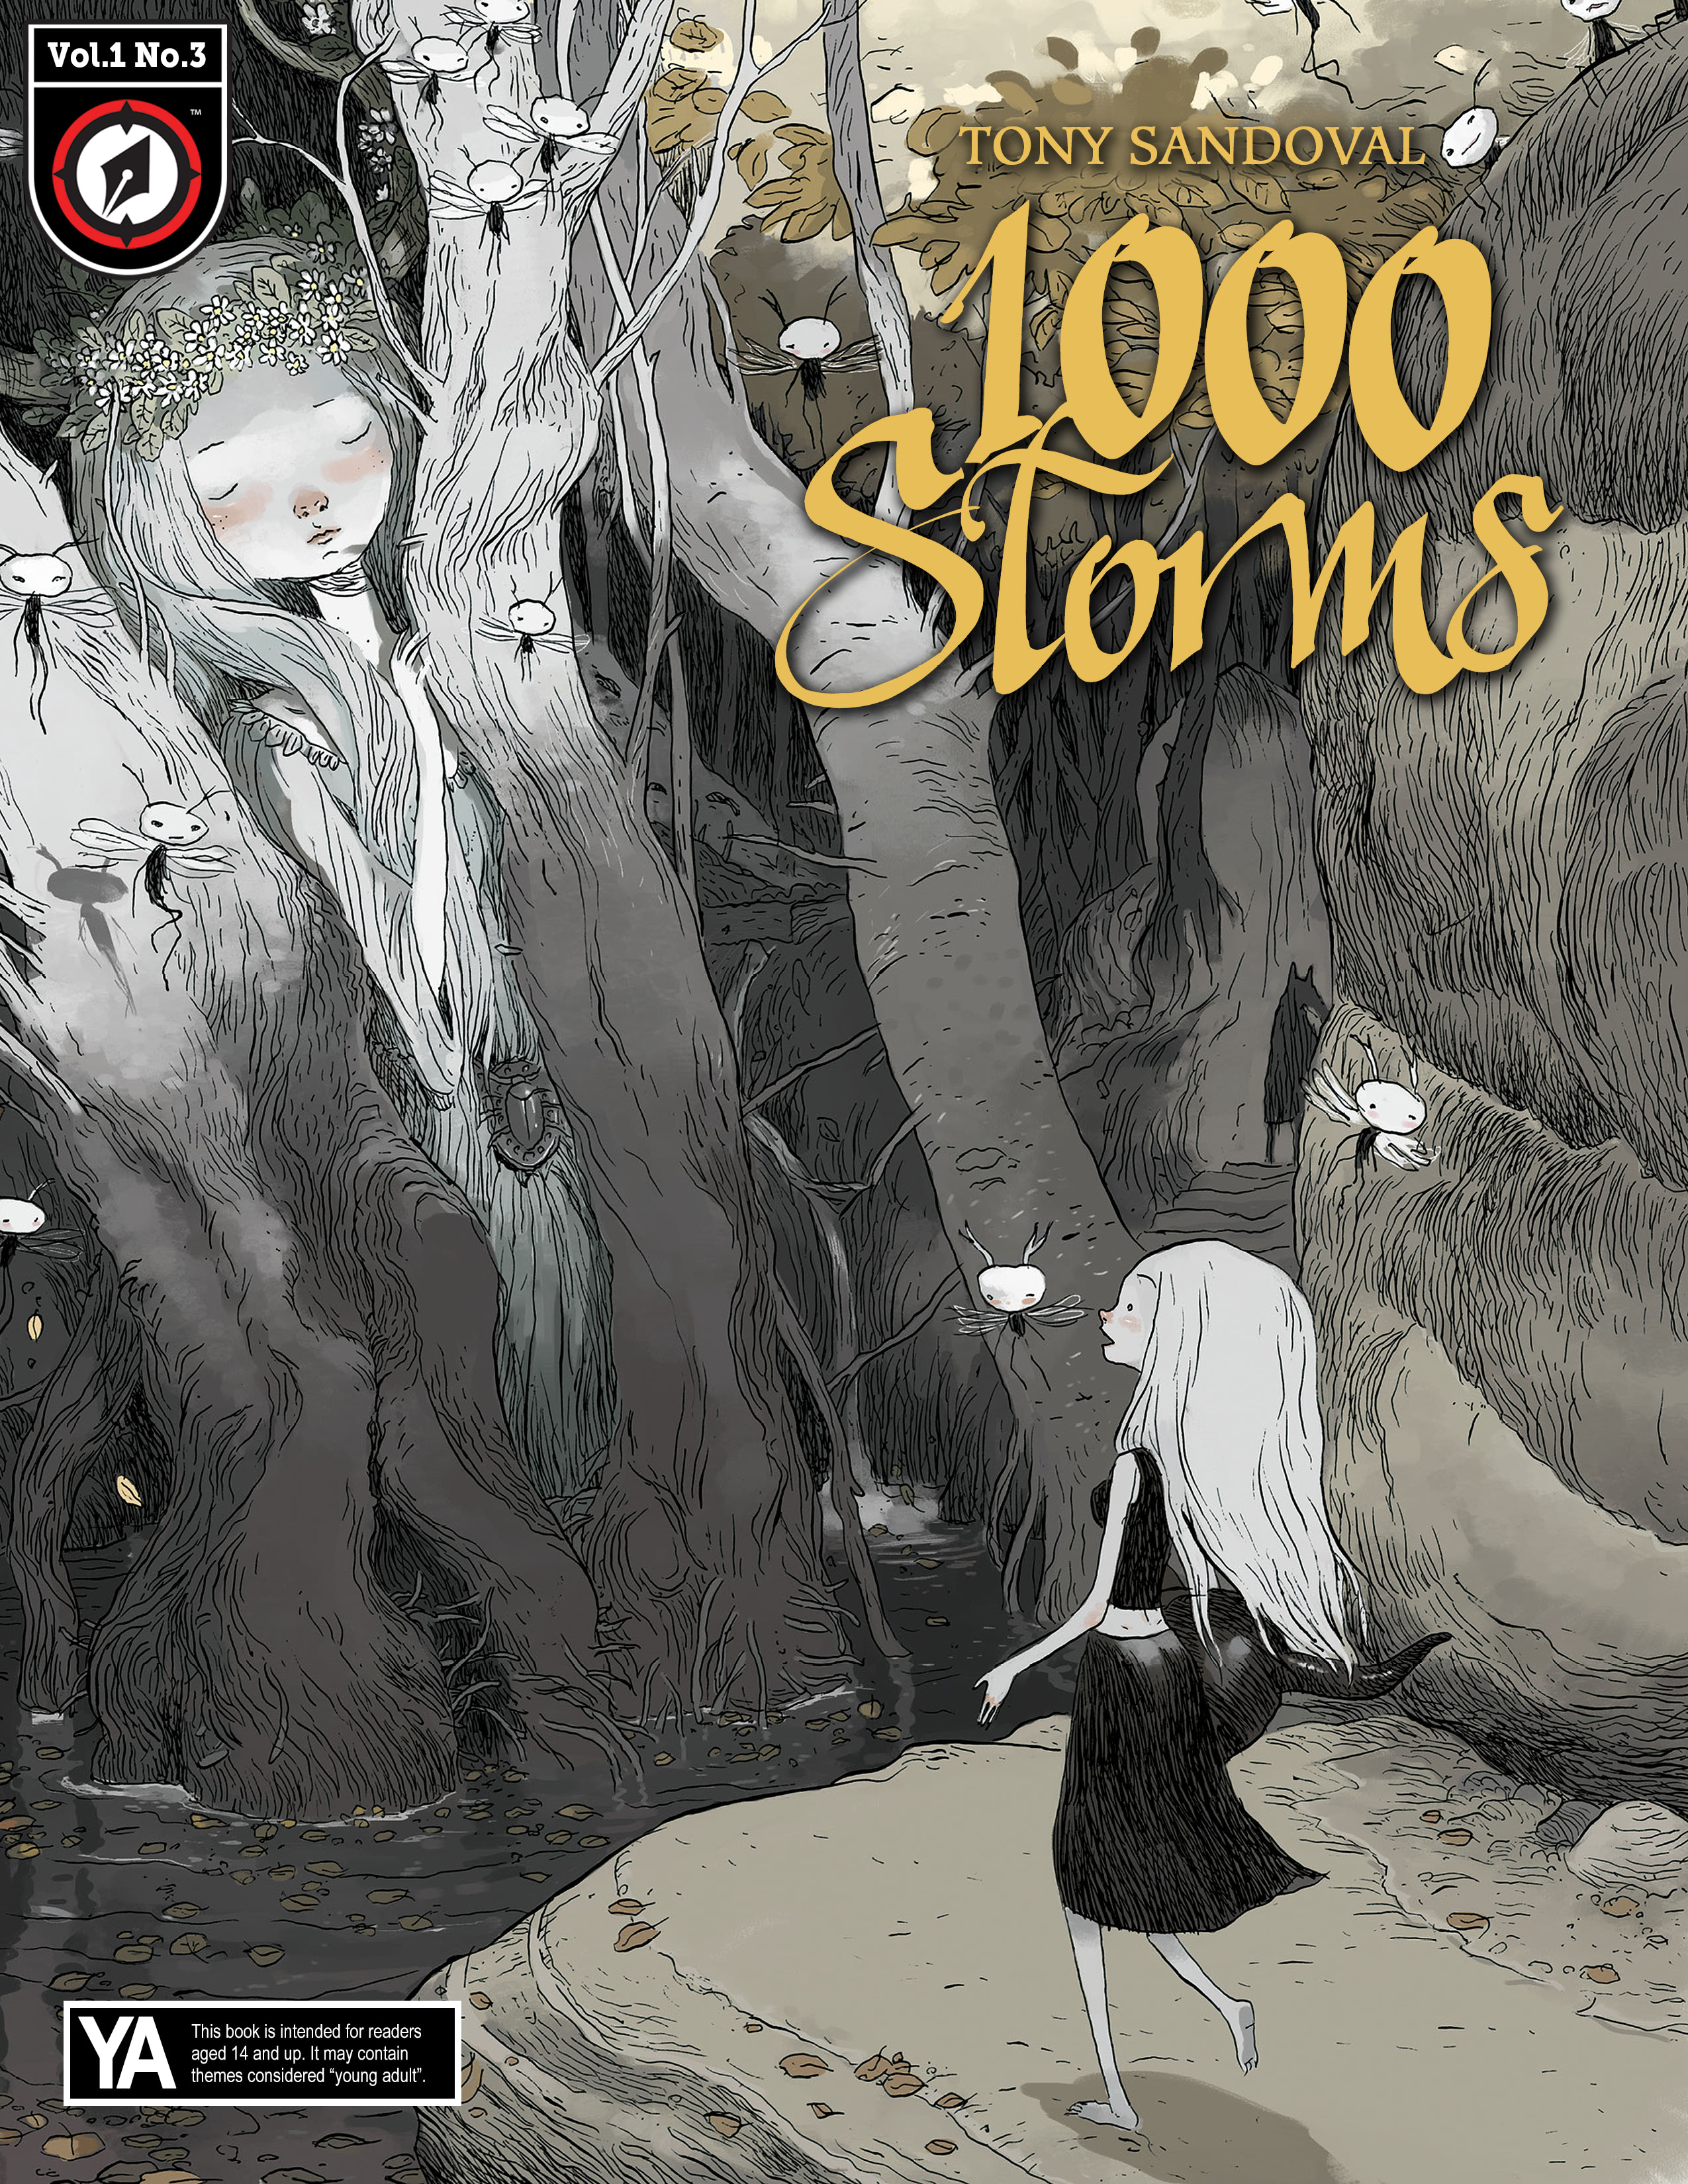 Read online 1000 Storms comic -  Issue #3 - 1